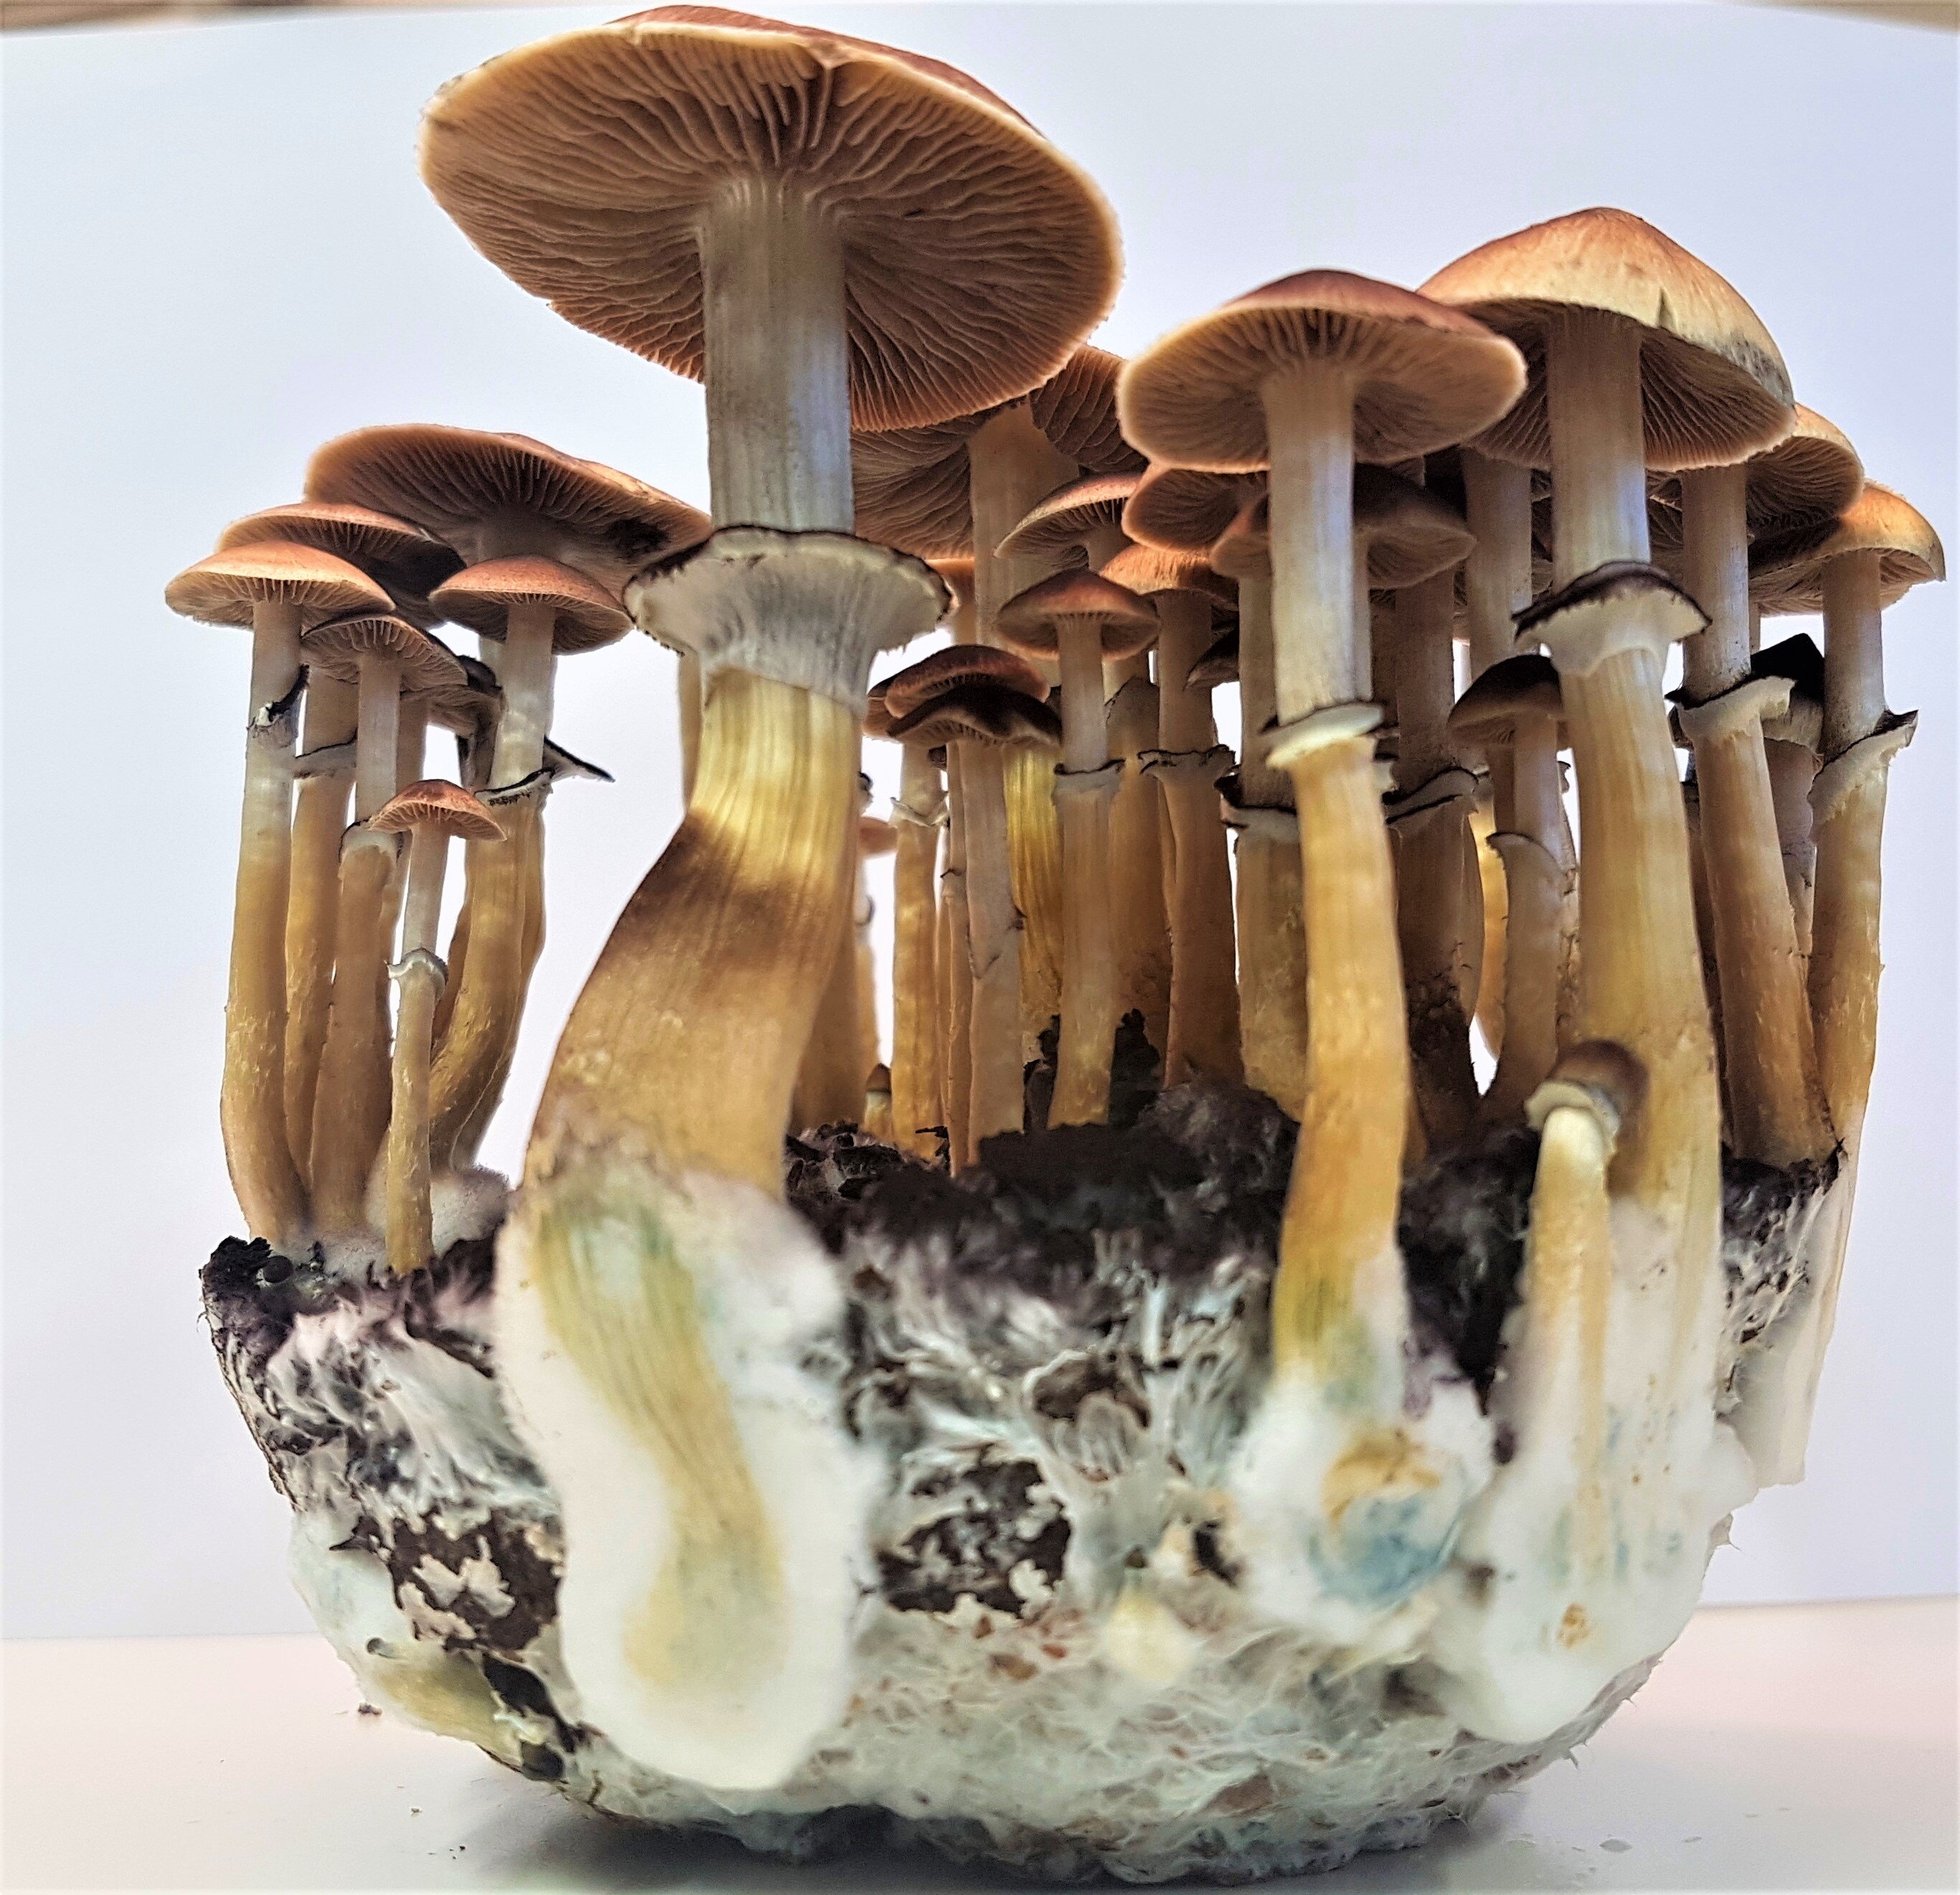 New study sheds light on the structure and evolution of an enzyme in psychoactive fungi